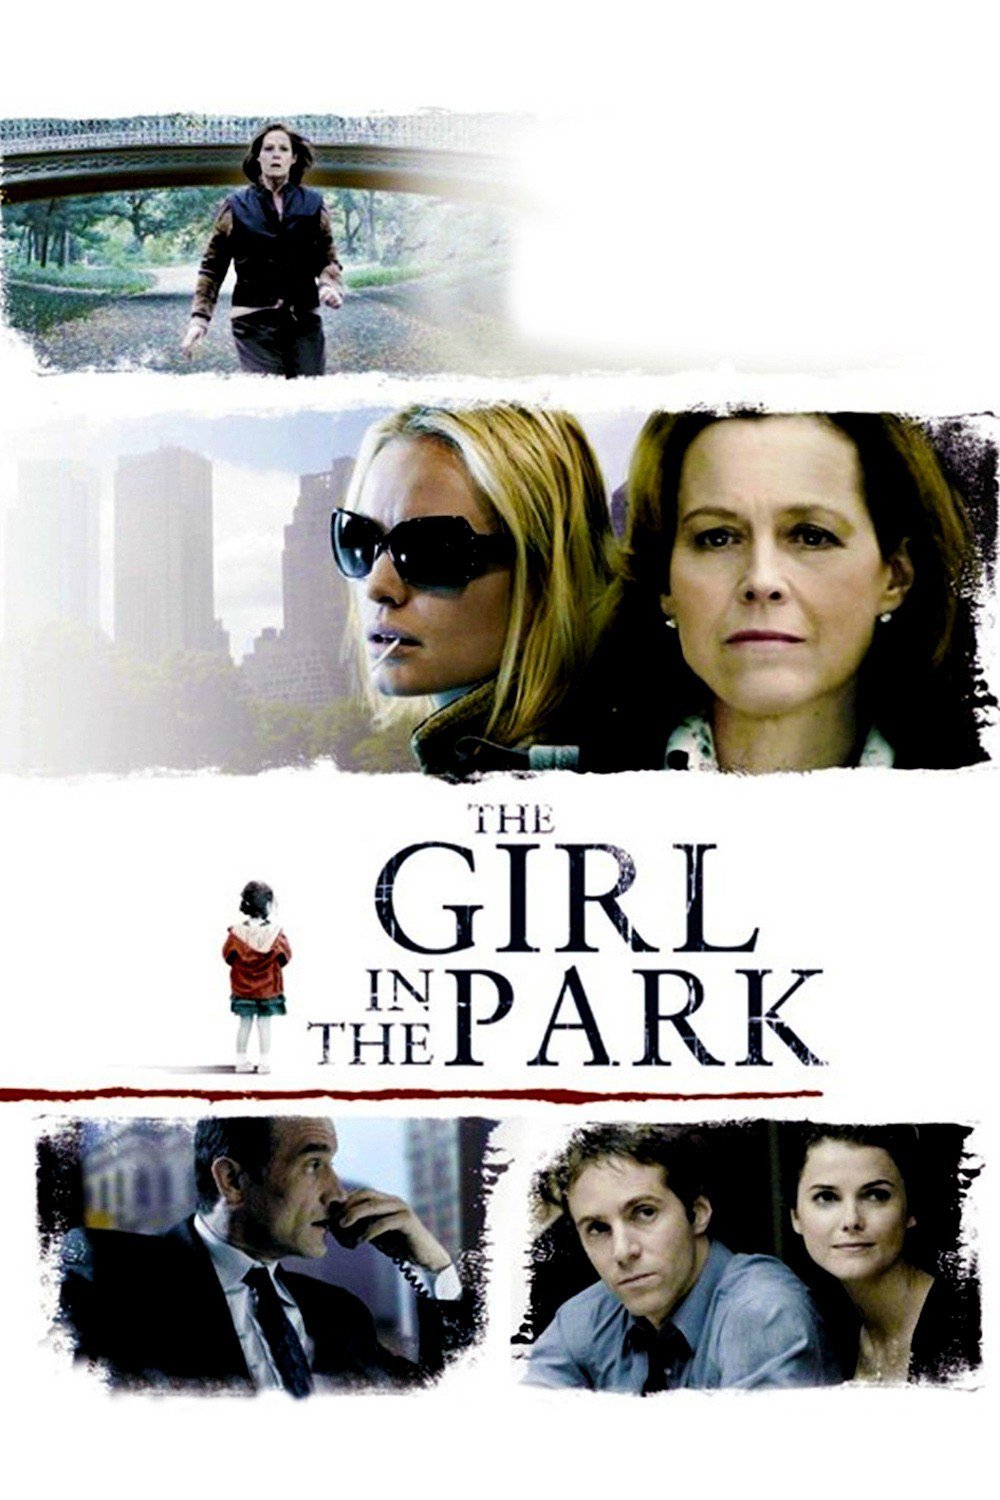 Poster for the movie "The Girl in the Park"